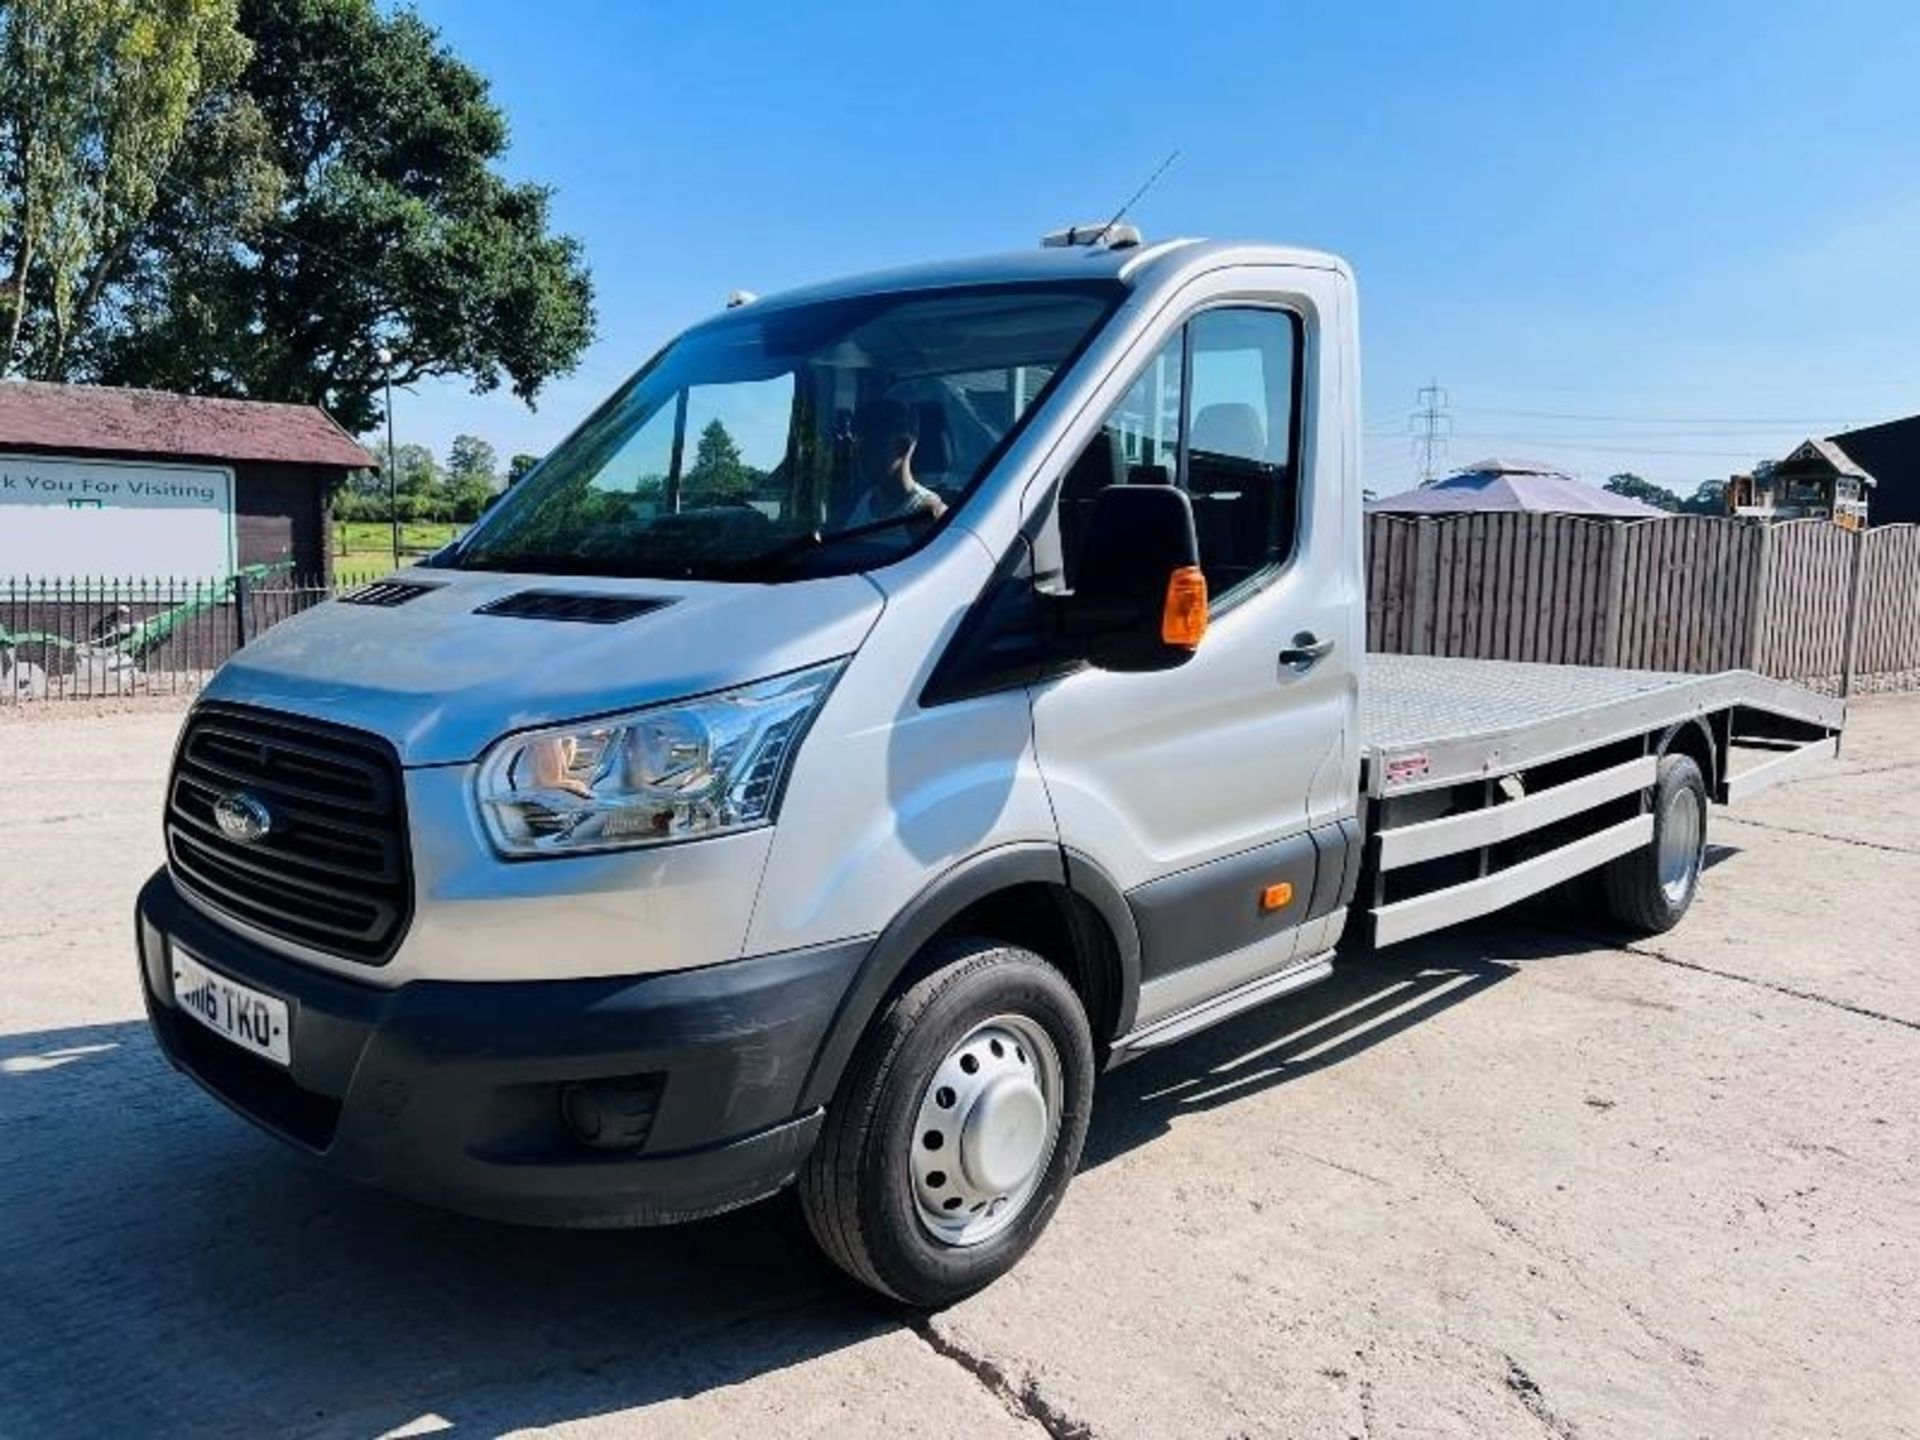 2016 FORD TRANSIT 4X2 RECOVERY TRUCK - ALLOY BEAVER TAIL BODY - Image 3 of 18